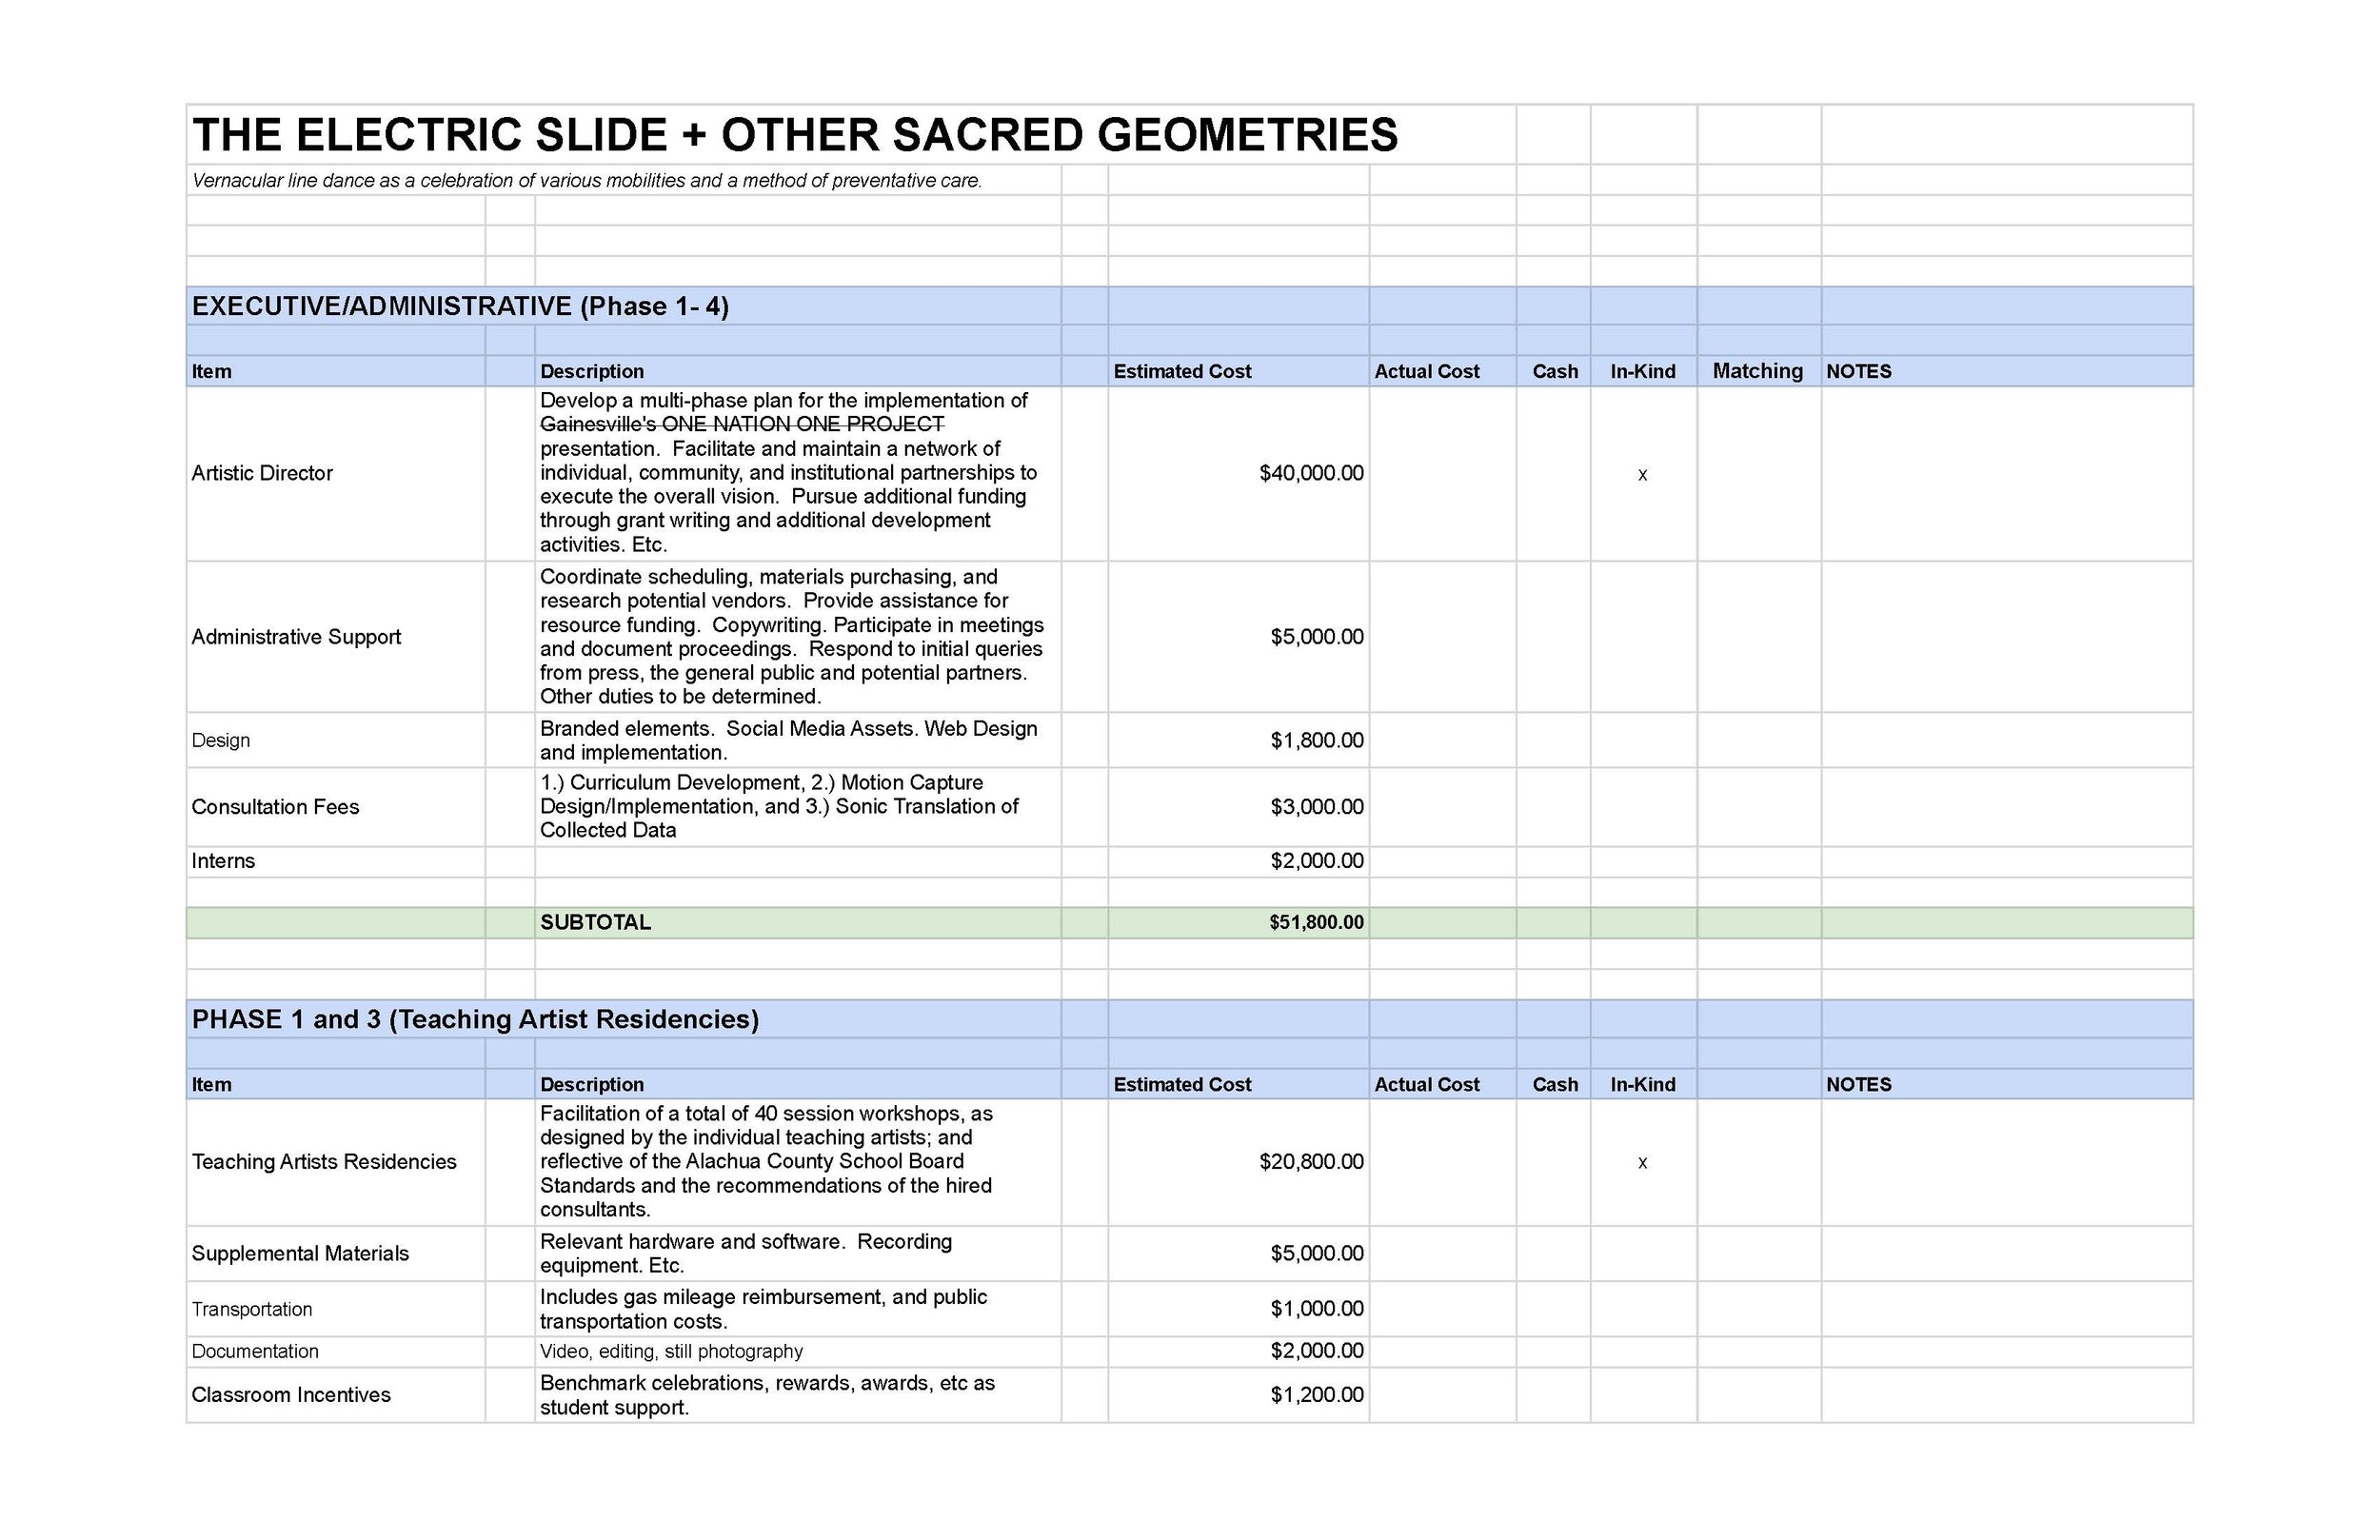 ONOP_THE ELECTRIC SLIDE + OTHER SACRED GEOMETRIES_Budget_DRAFT10272022 - Sheet1_Page_1.jpg